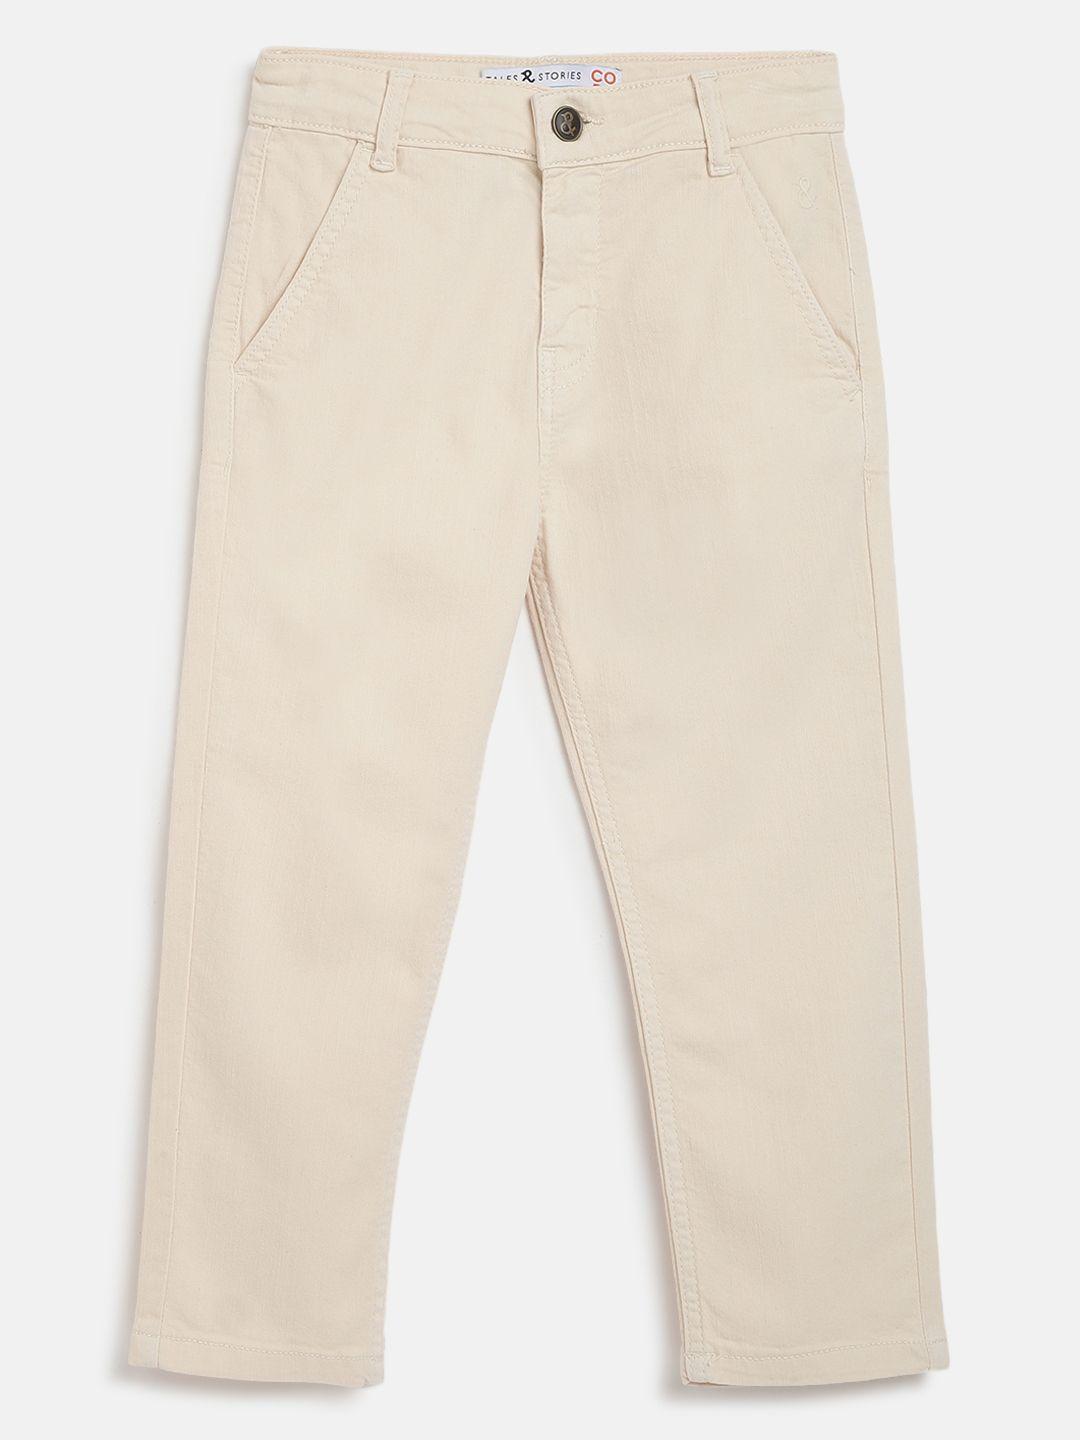 tales & stories boys mid-rise slim fit chinos